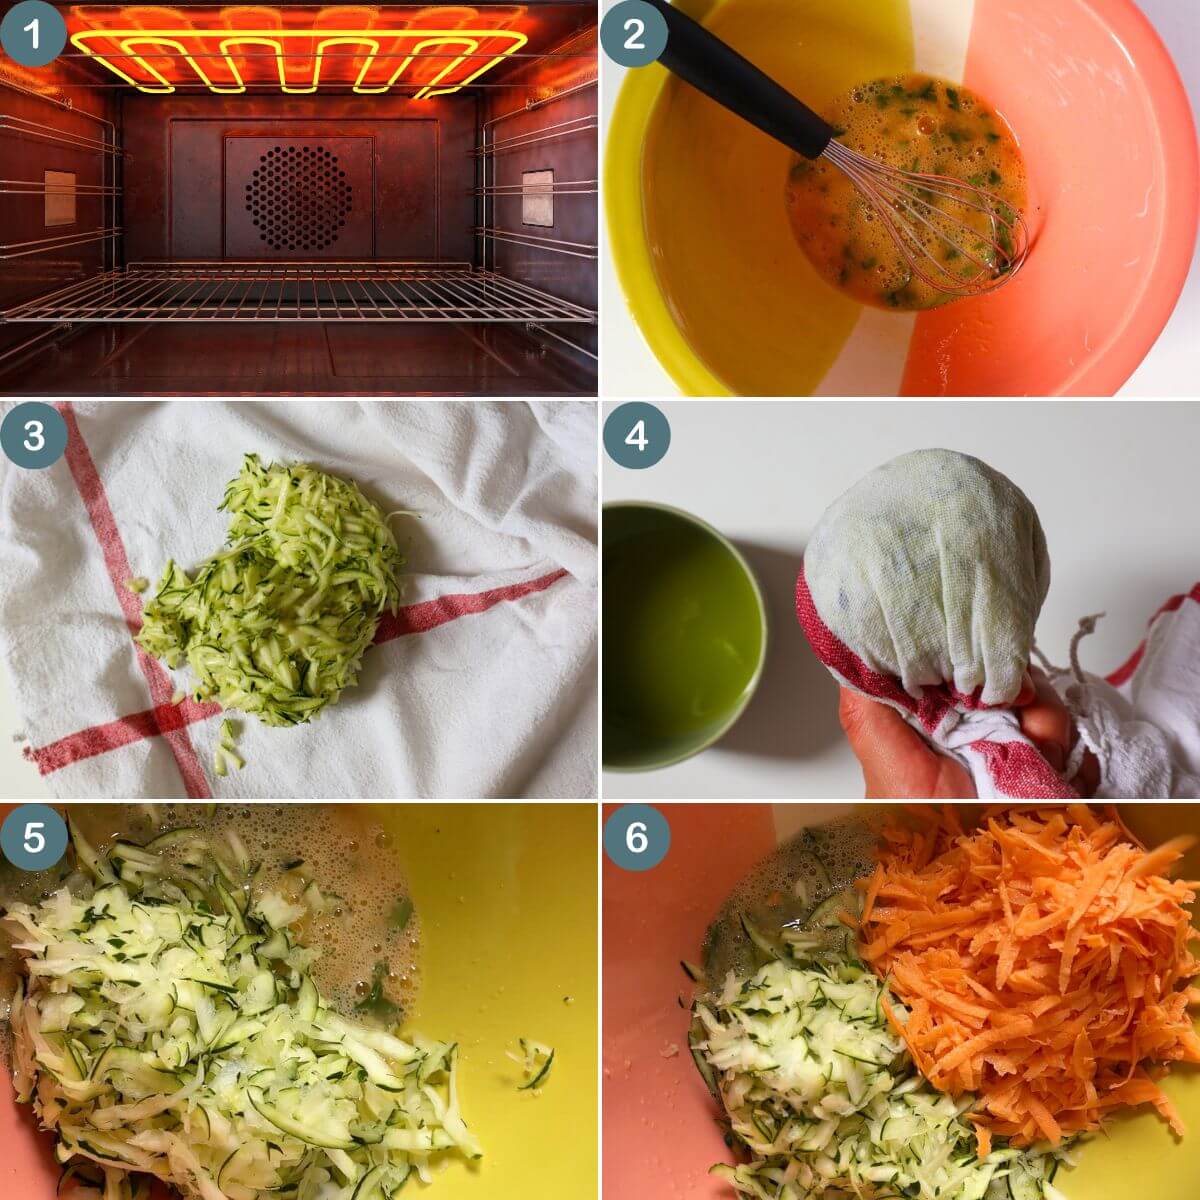 Collage of 6 images showing how to make the recipe